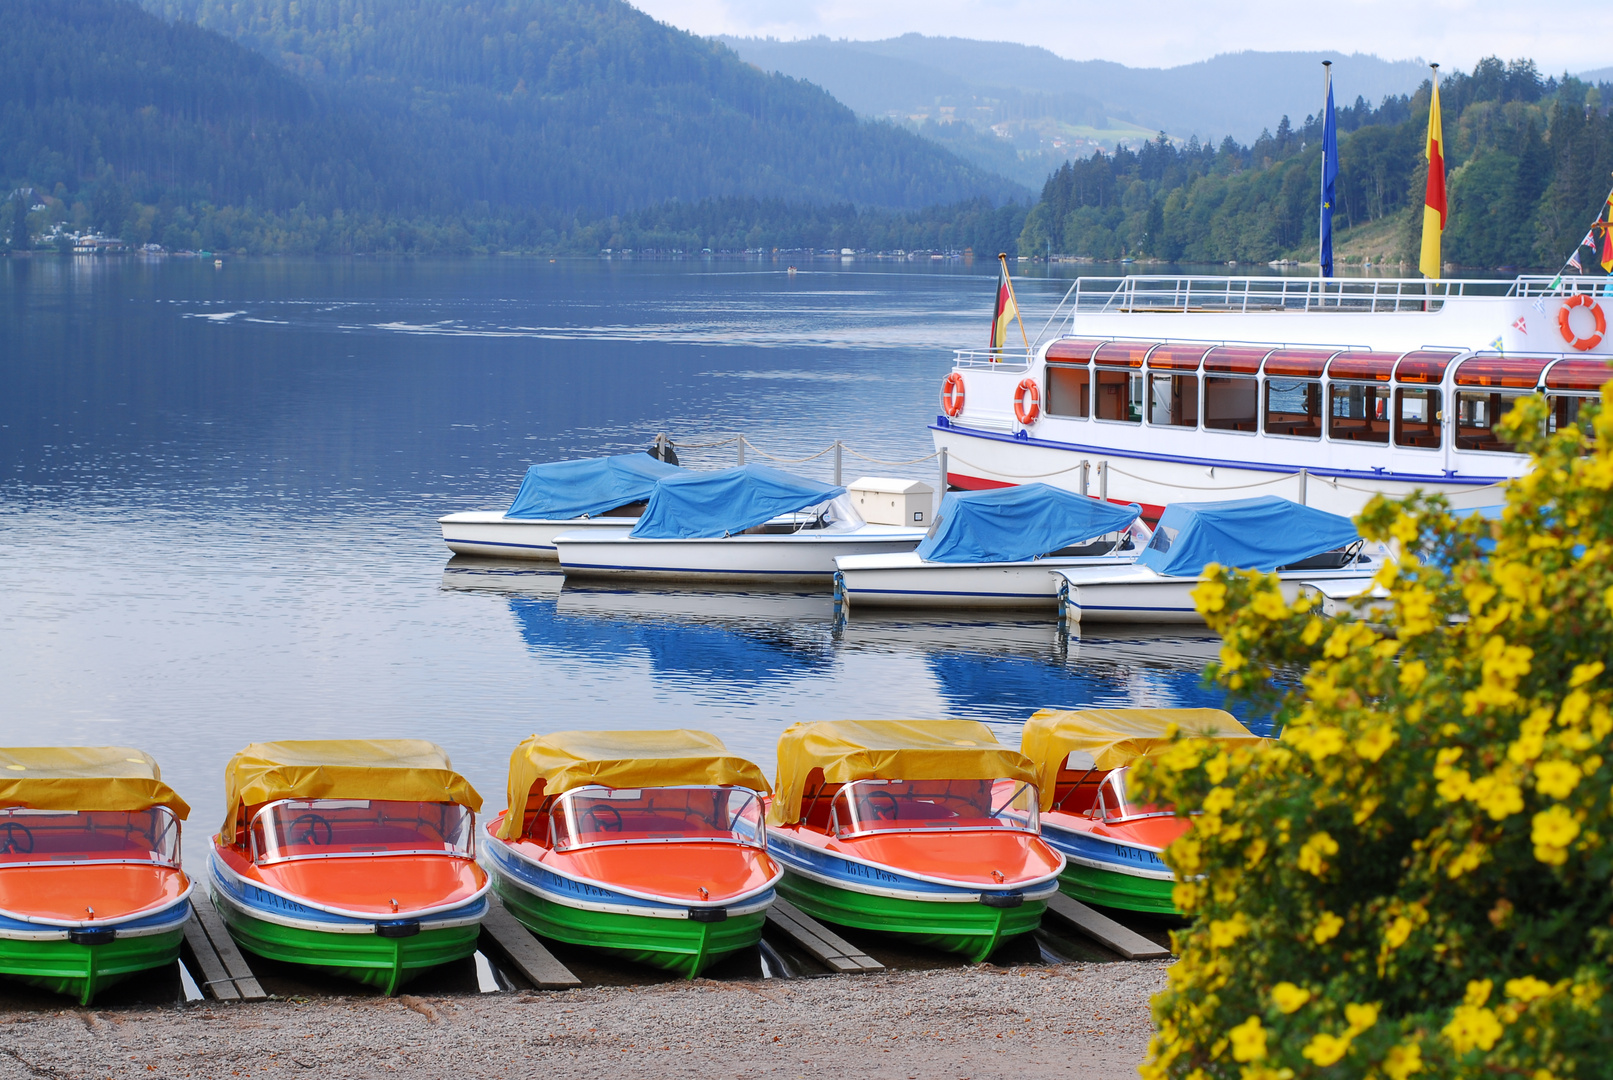 Am Morgen am Titisee